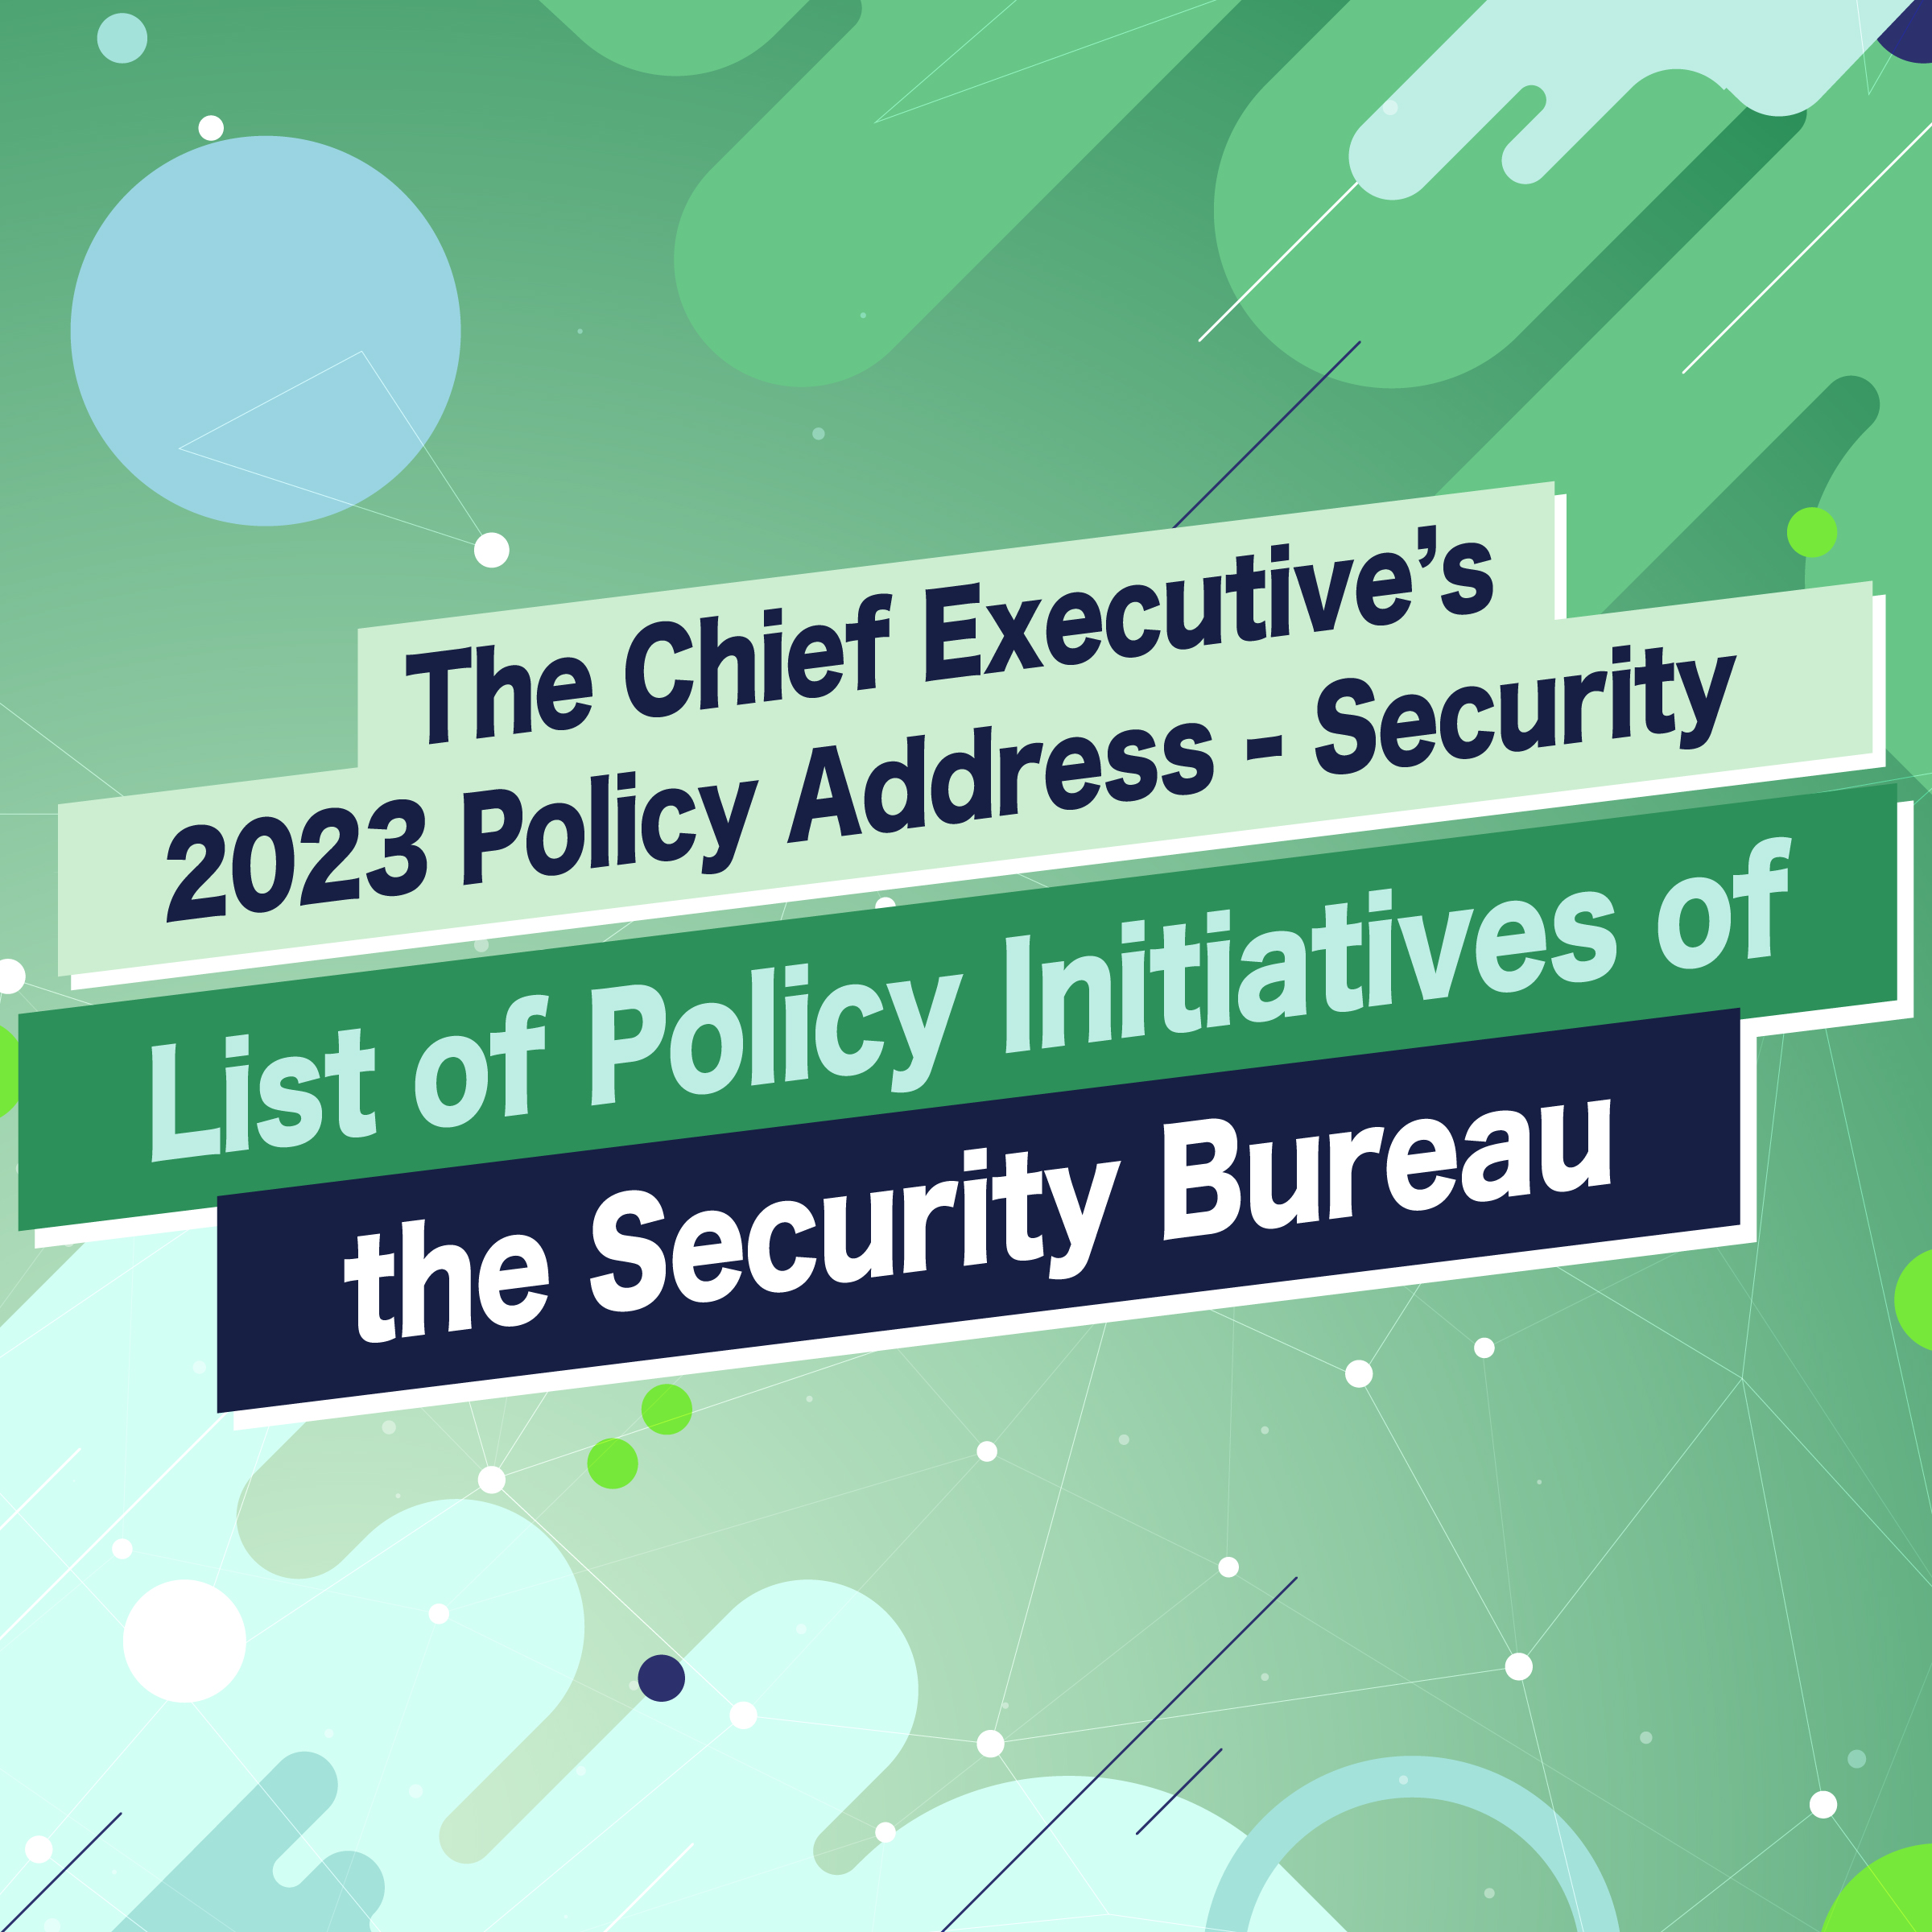 2023 Policy Address 《Security》